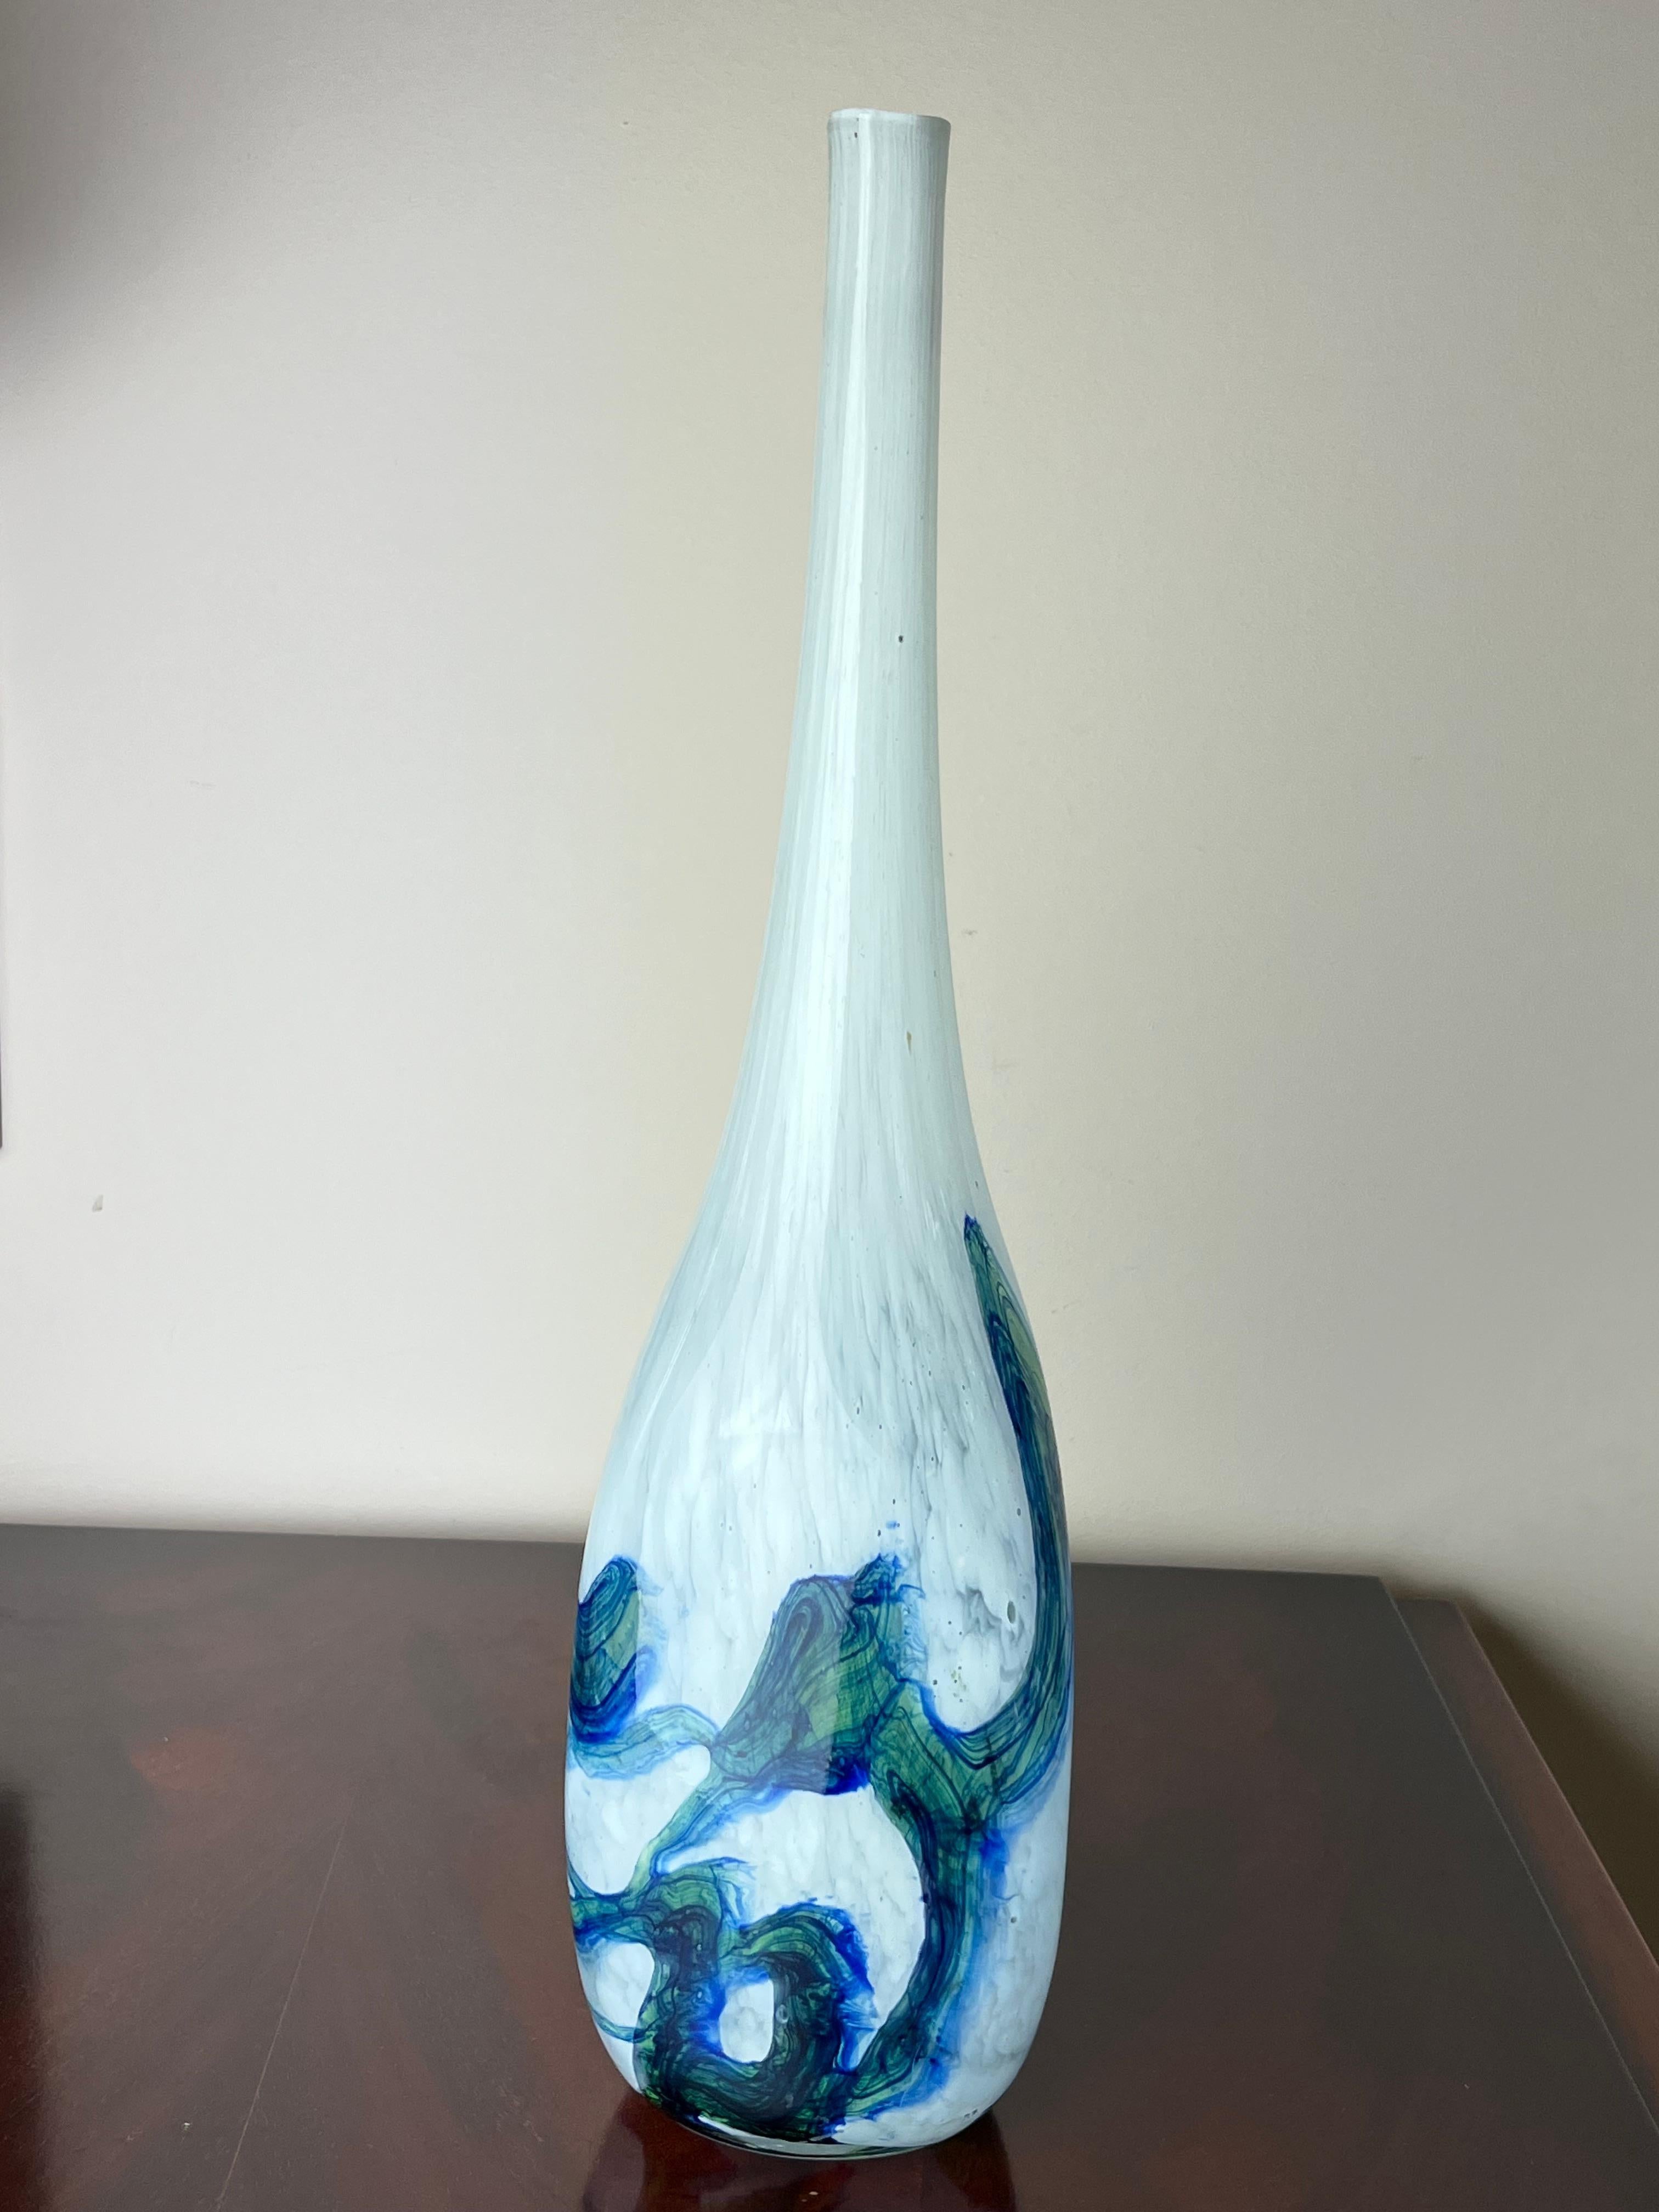 Stem vase in polychrome Murano glass, Italy, 1960s
Intact, found in a noble apartment.
In the descriptive photographs you will be able to notice the air bubbles inside the glass. This attests to the craftsmanship, typical of the best production of